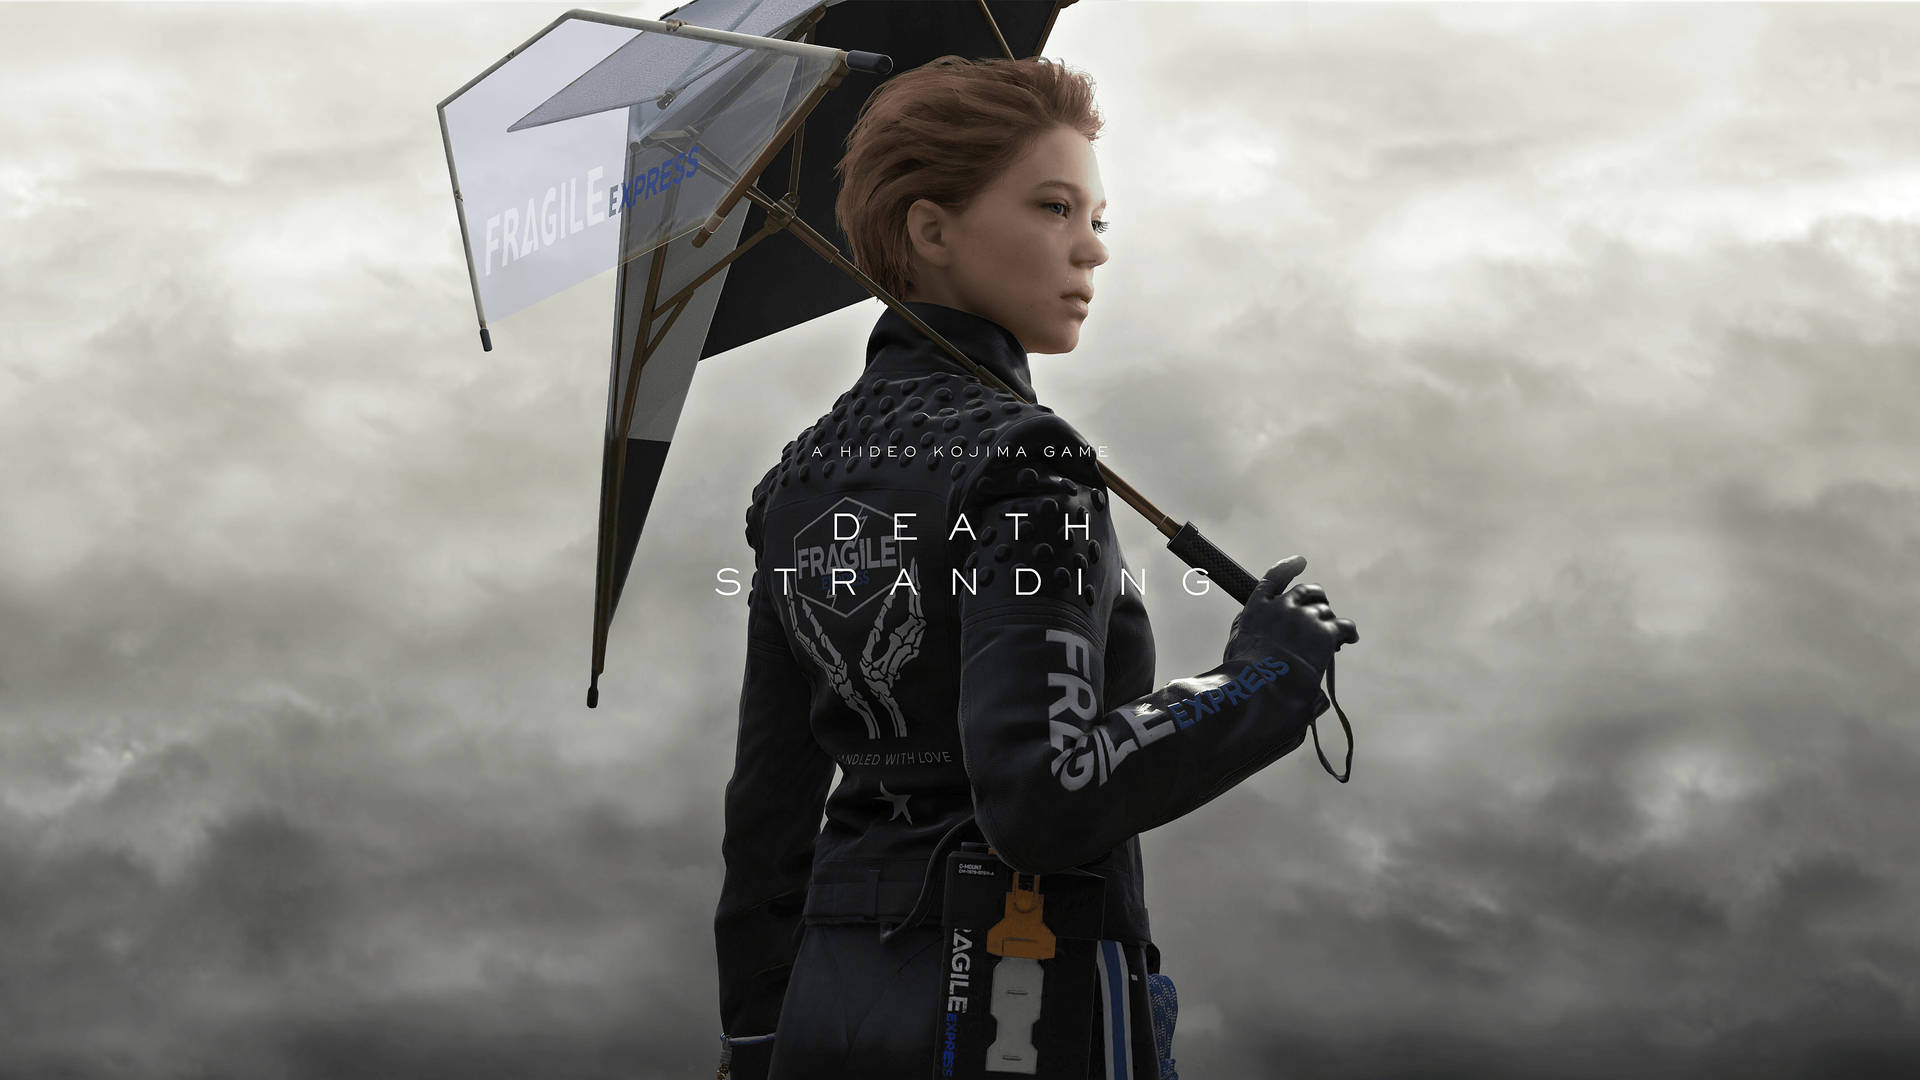 Download Fragile And Rain Clouds Death Stranding 4k Wallpaper | Wallpapers .com